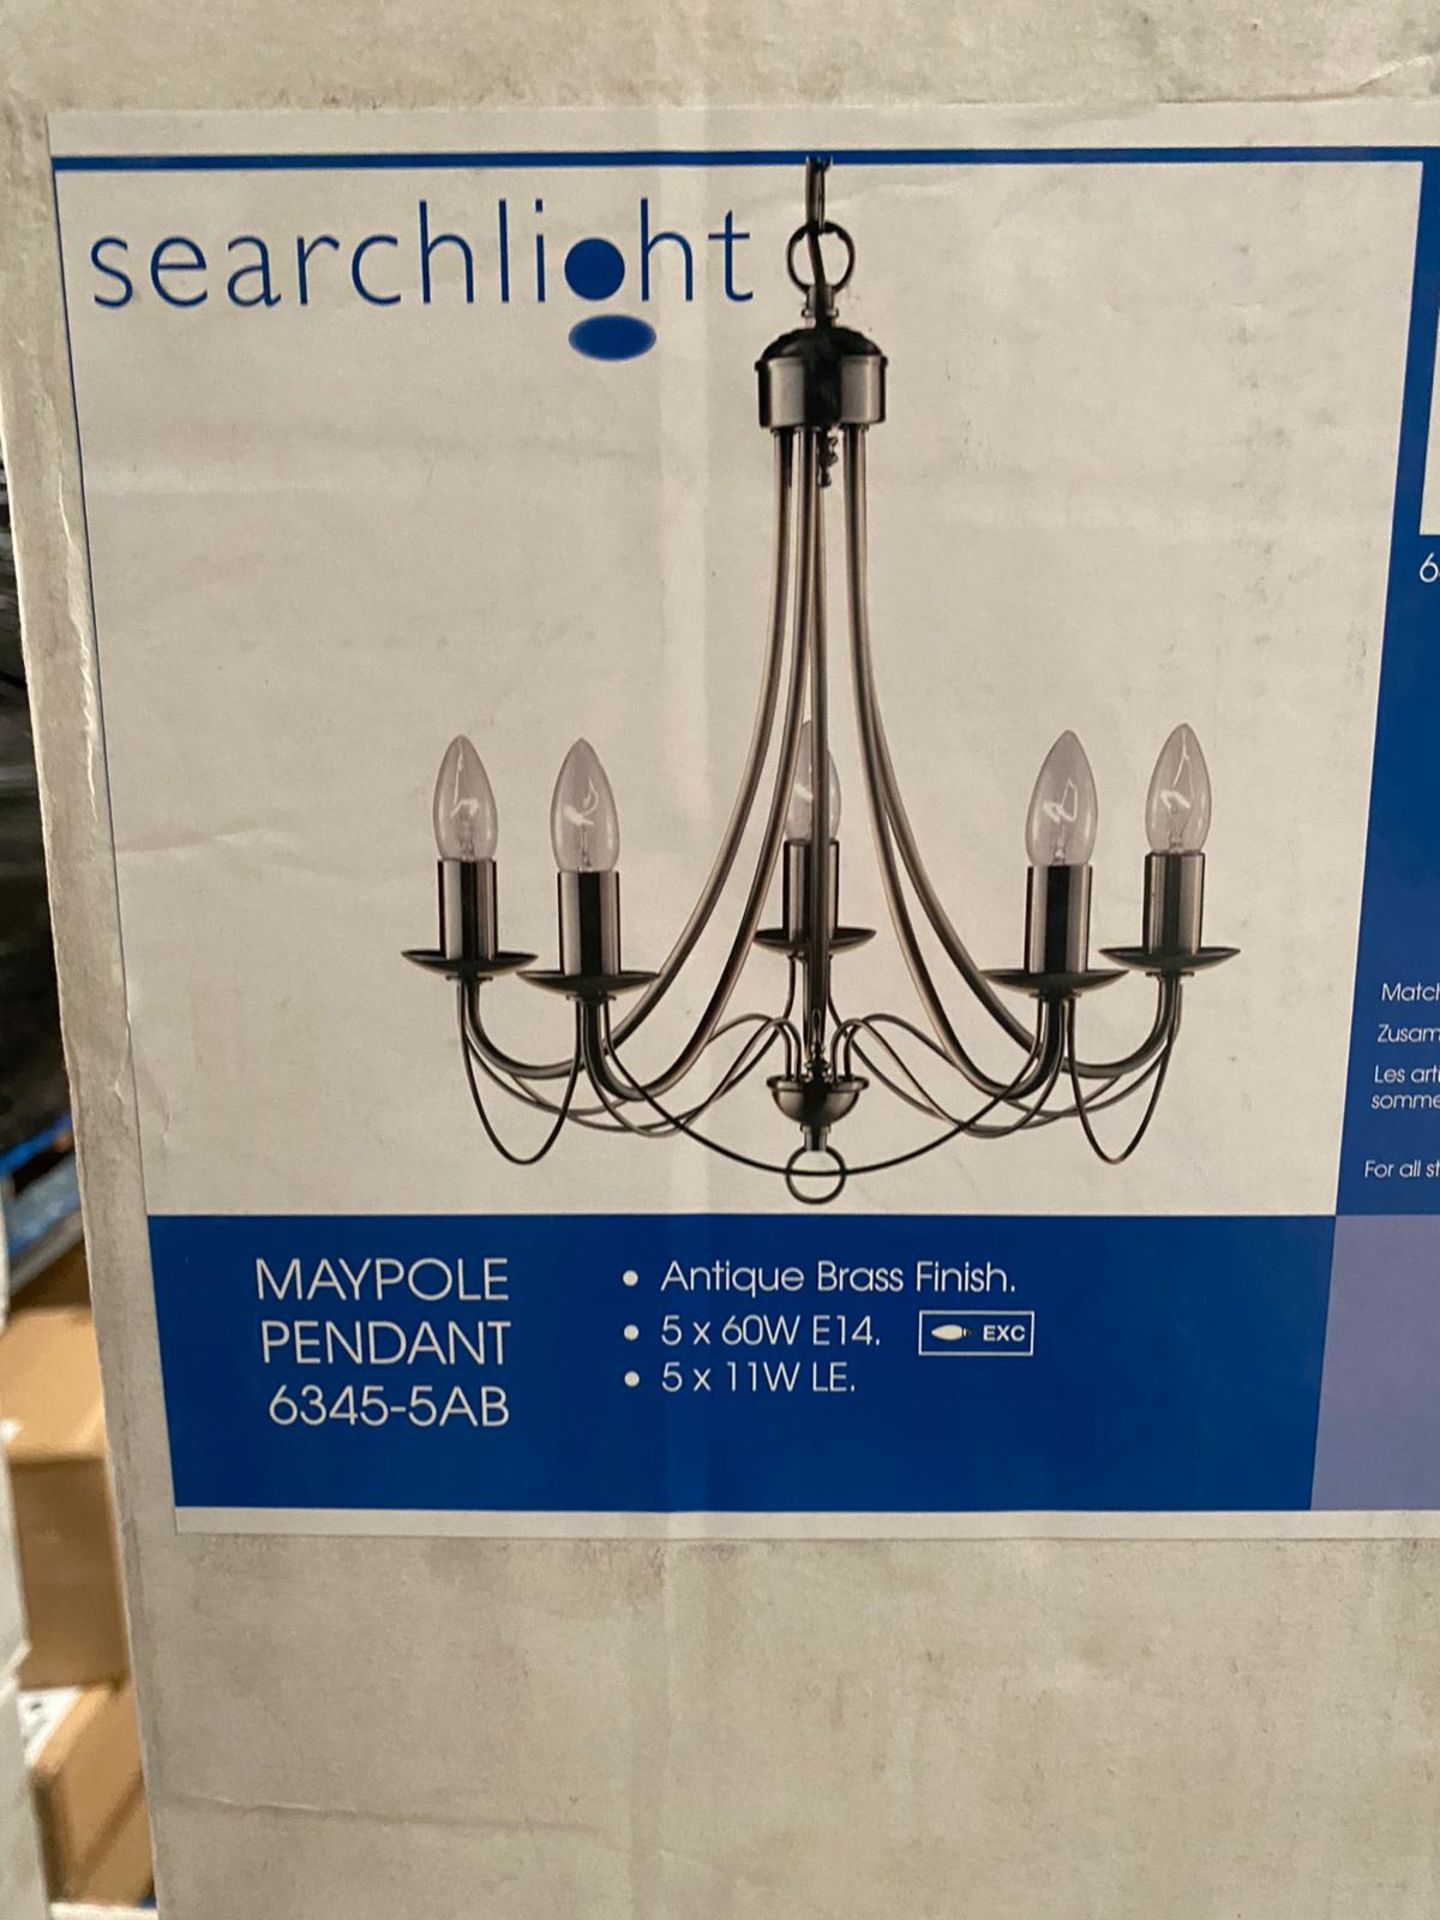 1 x Searchlight Maypole Pendant in Antique Brass - Ref: 6345-5AB - New and Boxed - RRP: £120 - Image 4 of 4